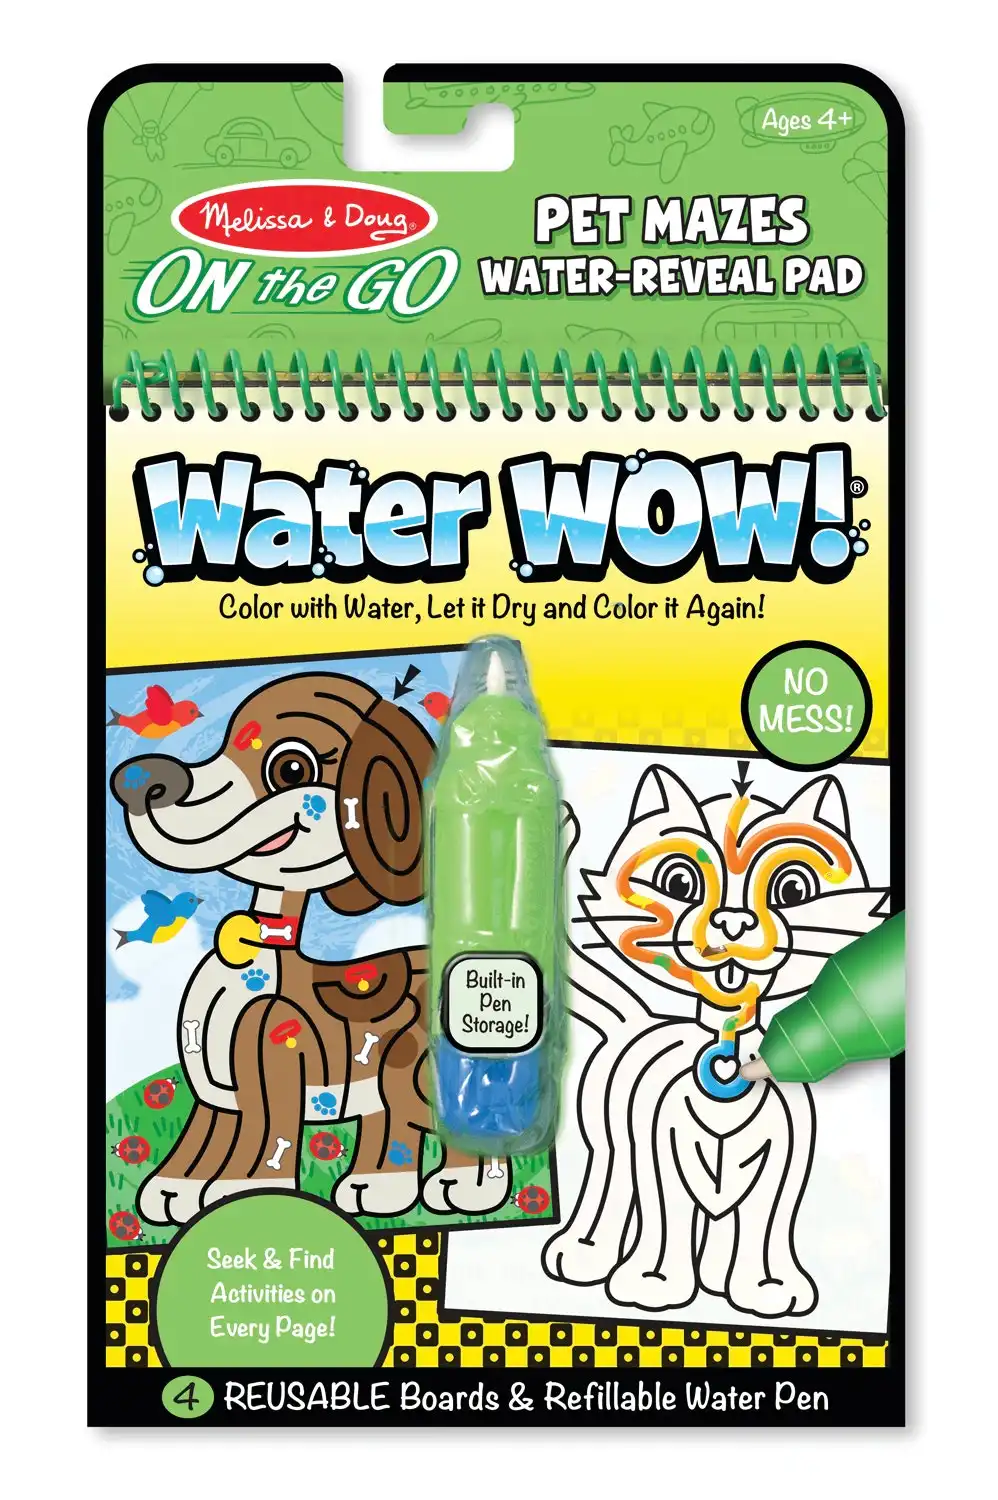 Melissa and Doug On The Go - Water WOW! - Pet Mazes